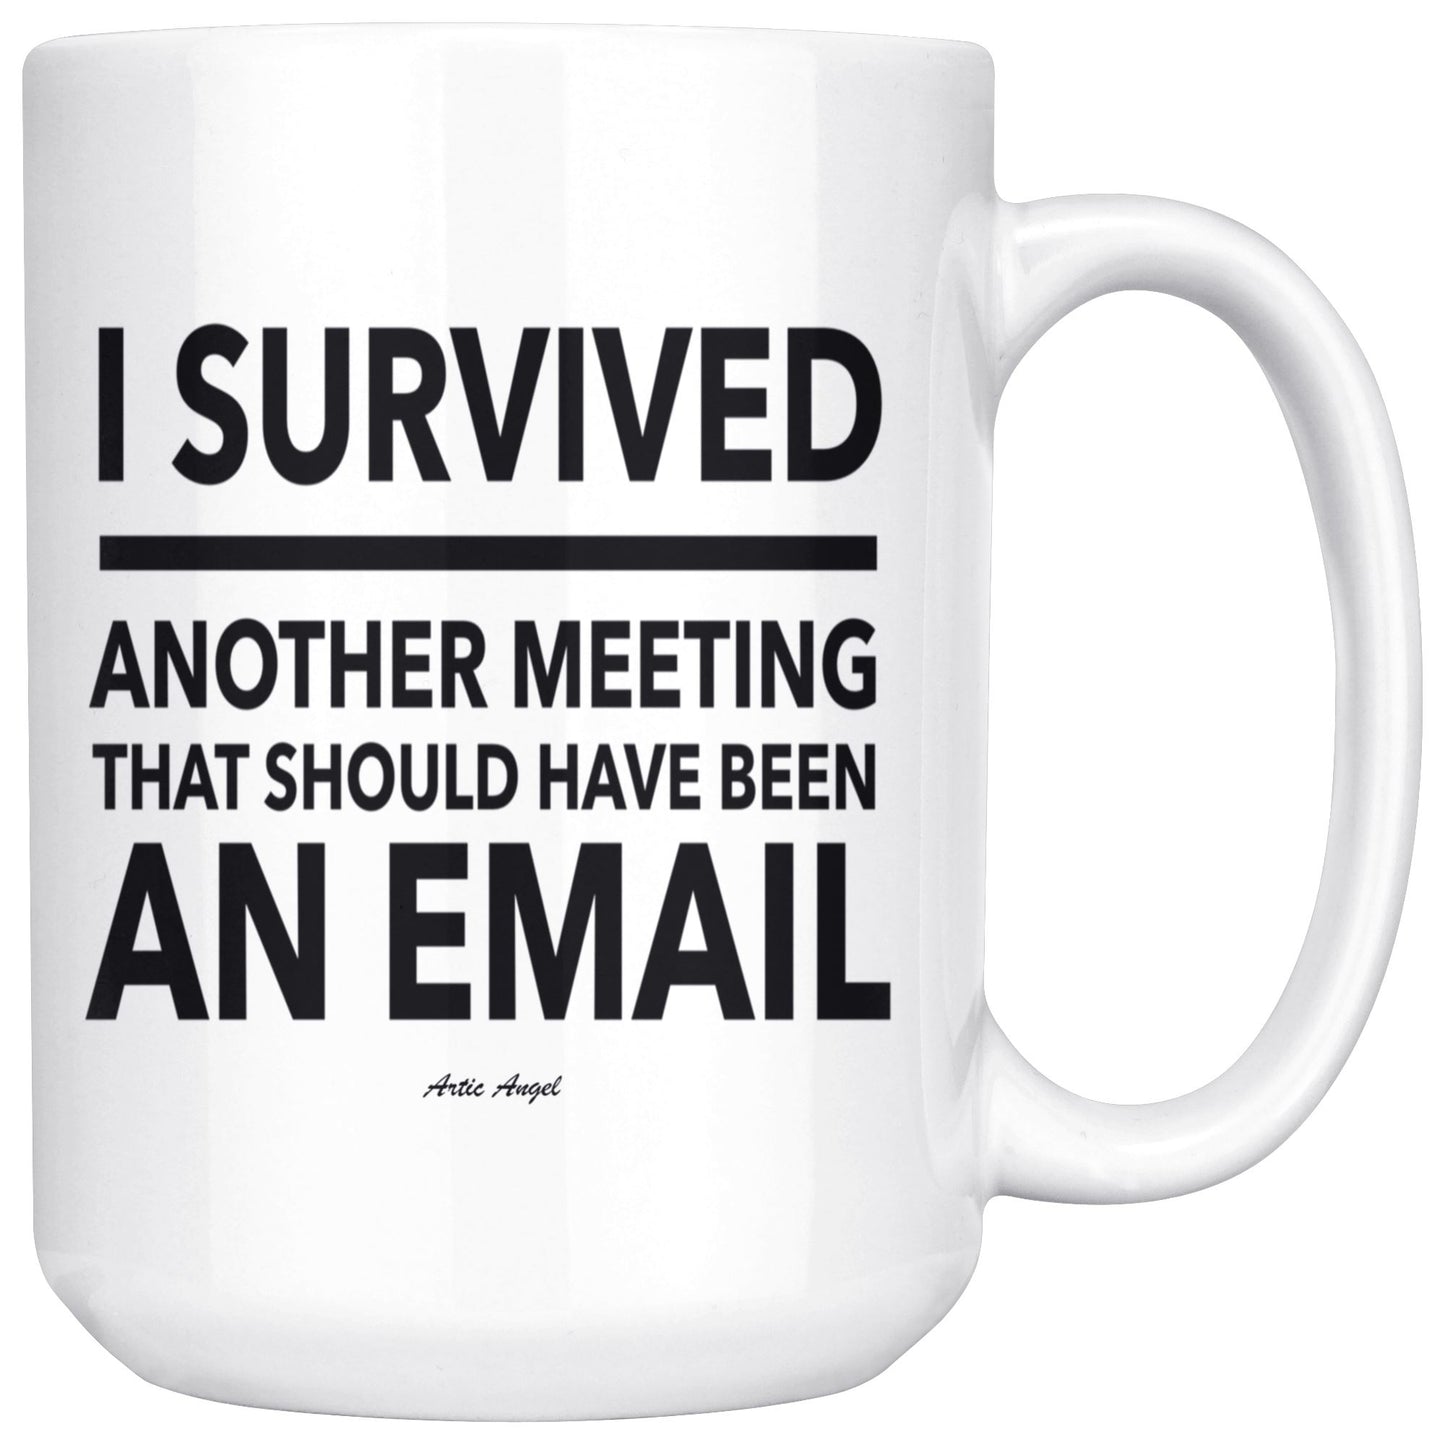 "I Survived Another Meeting That Should Have Been An Email" - Coffee Mug Drinkware White - 15oz 